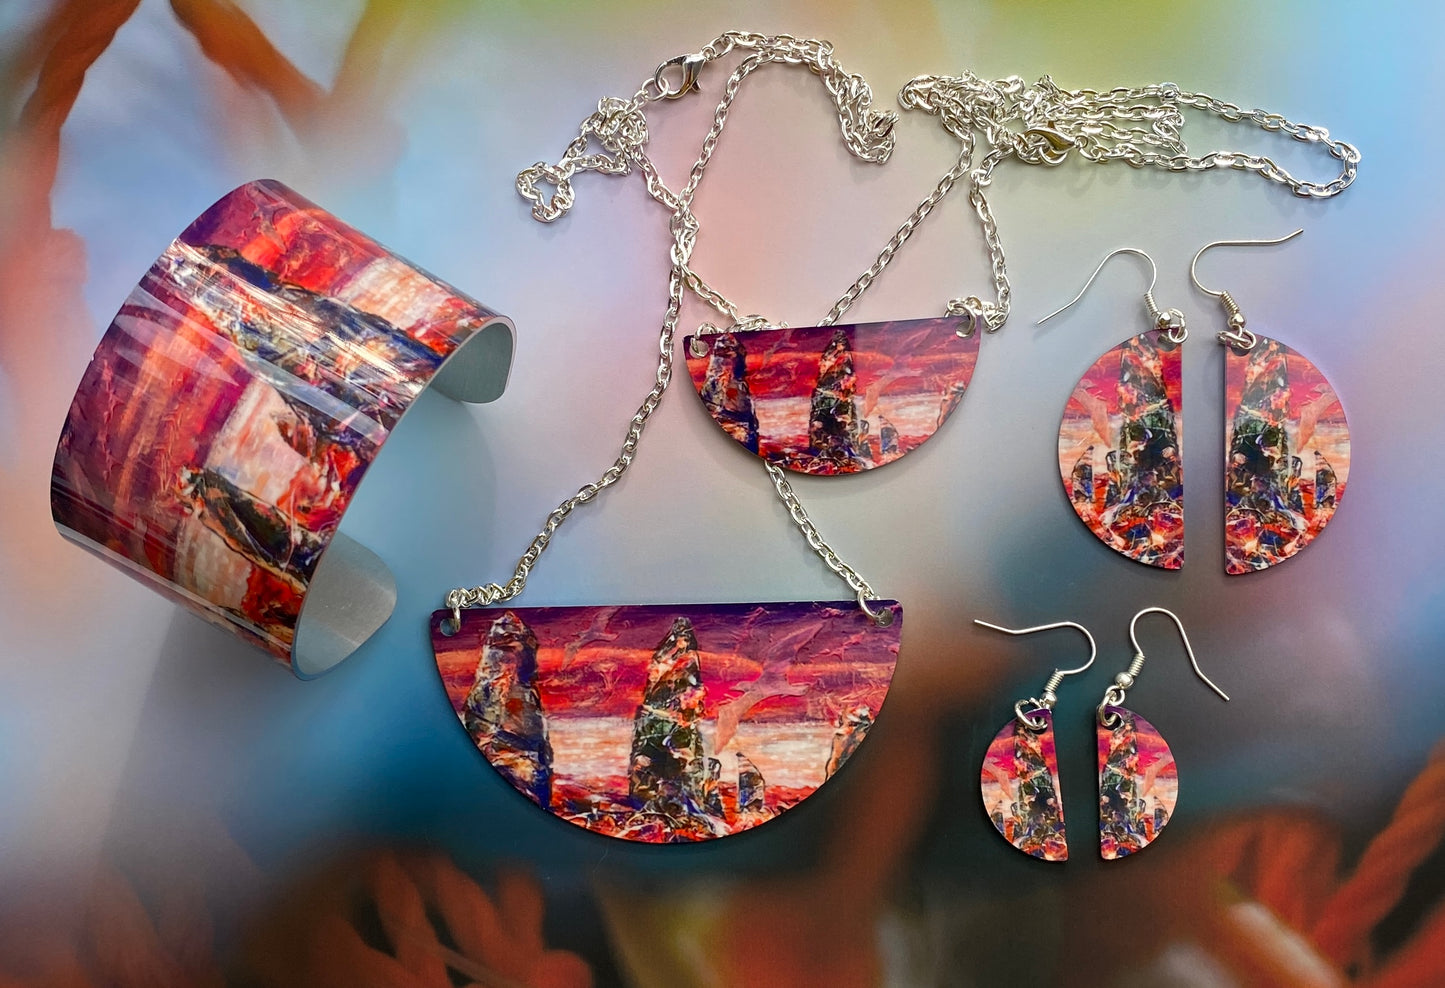 A collection of jewellery design , Wild sunset at THe Ring of Brodgar by Orkney artist Jane Glue, Scotland